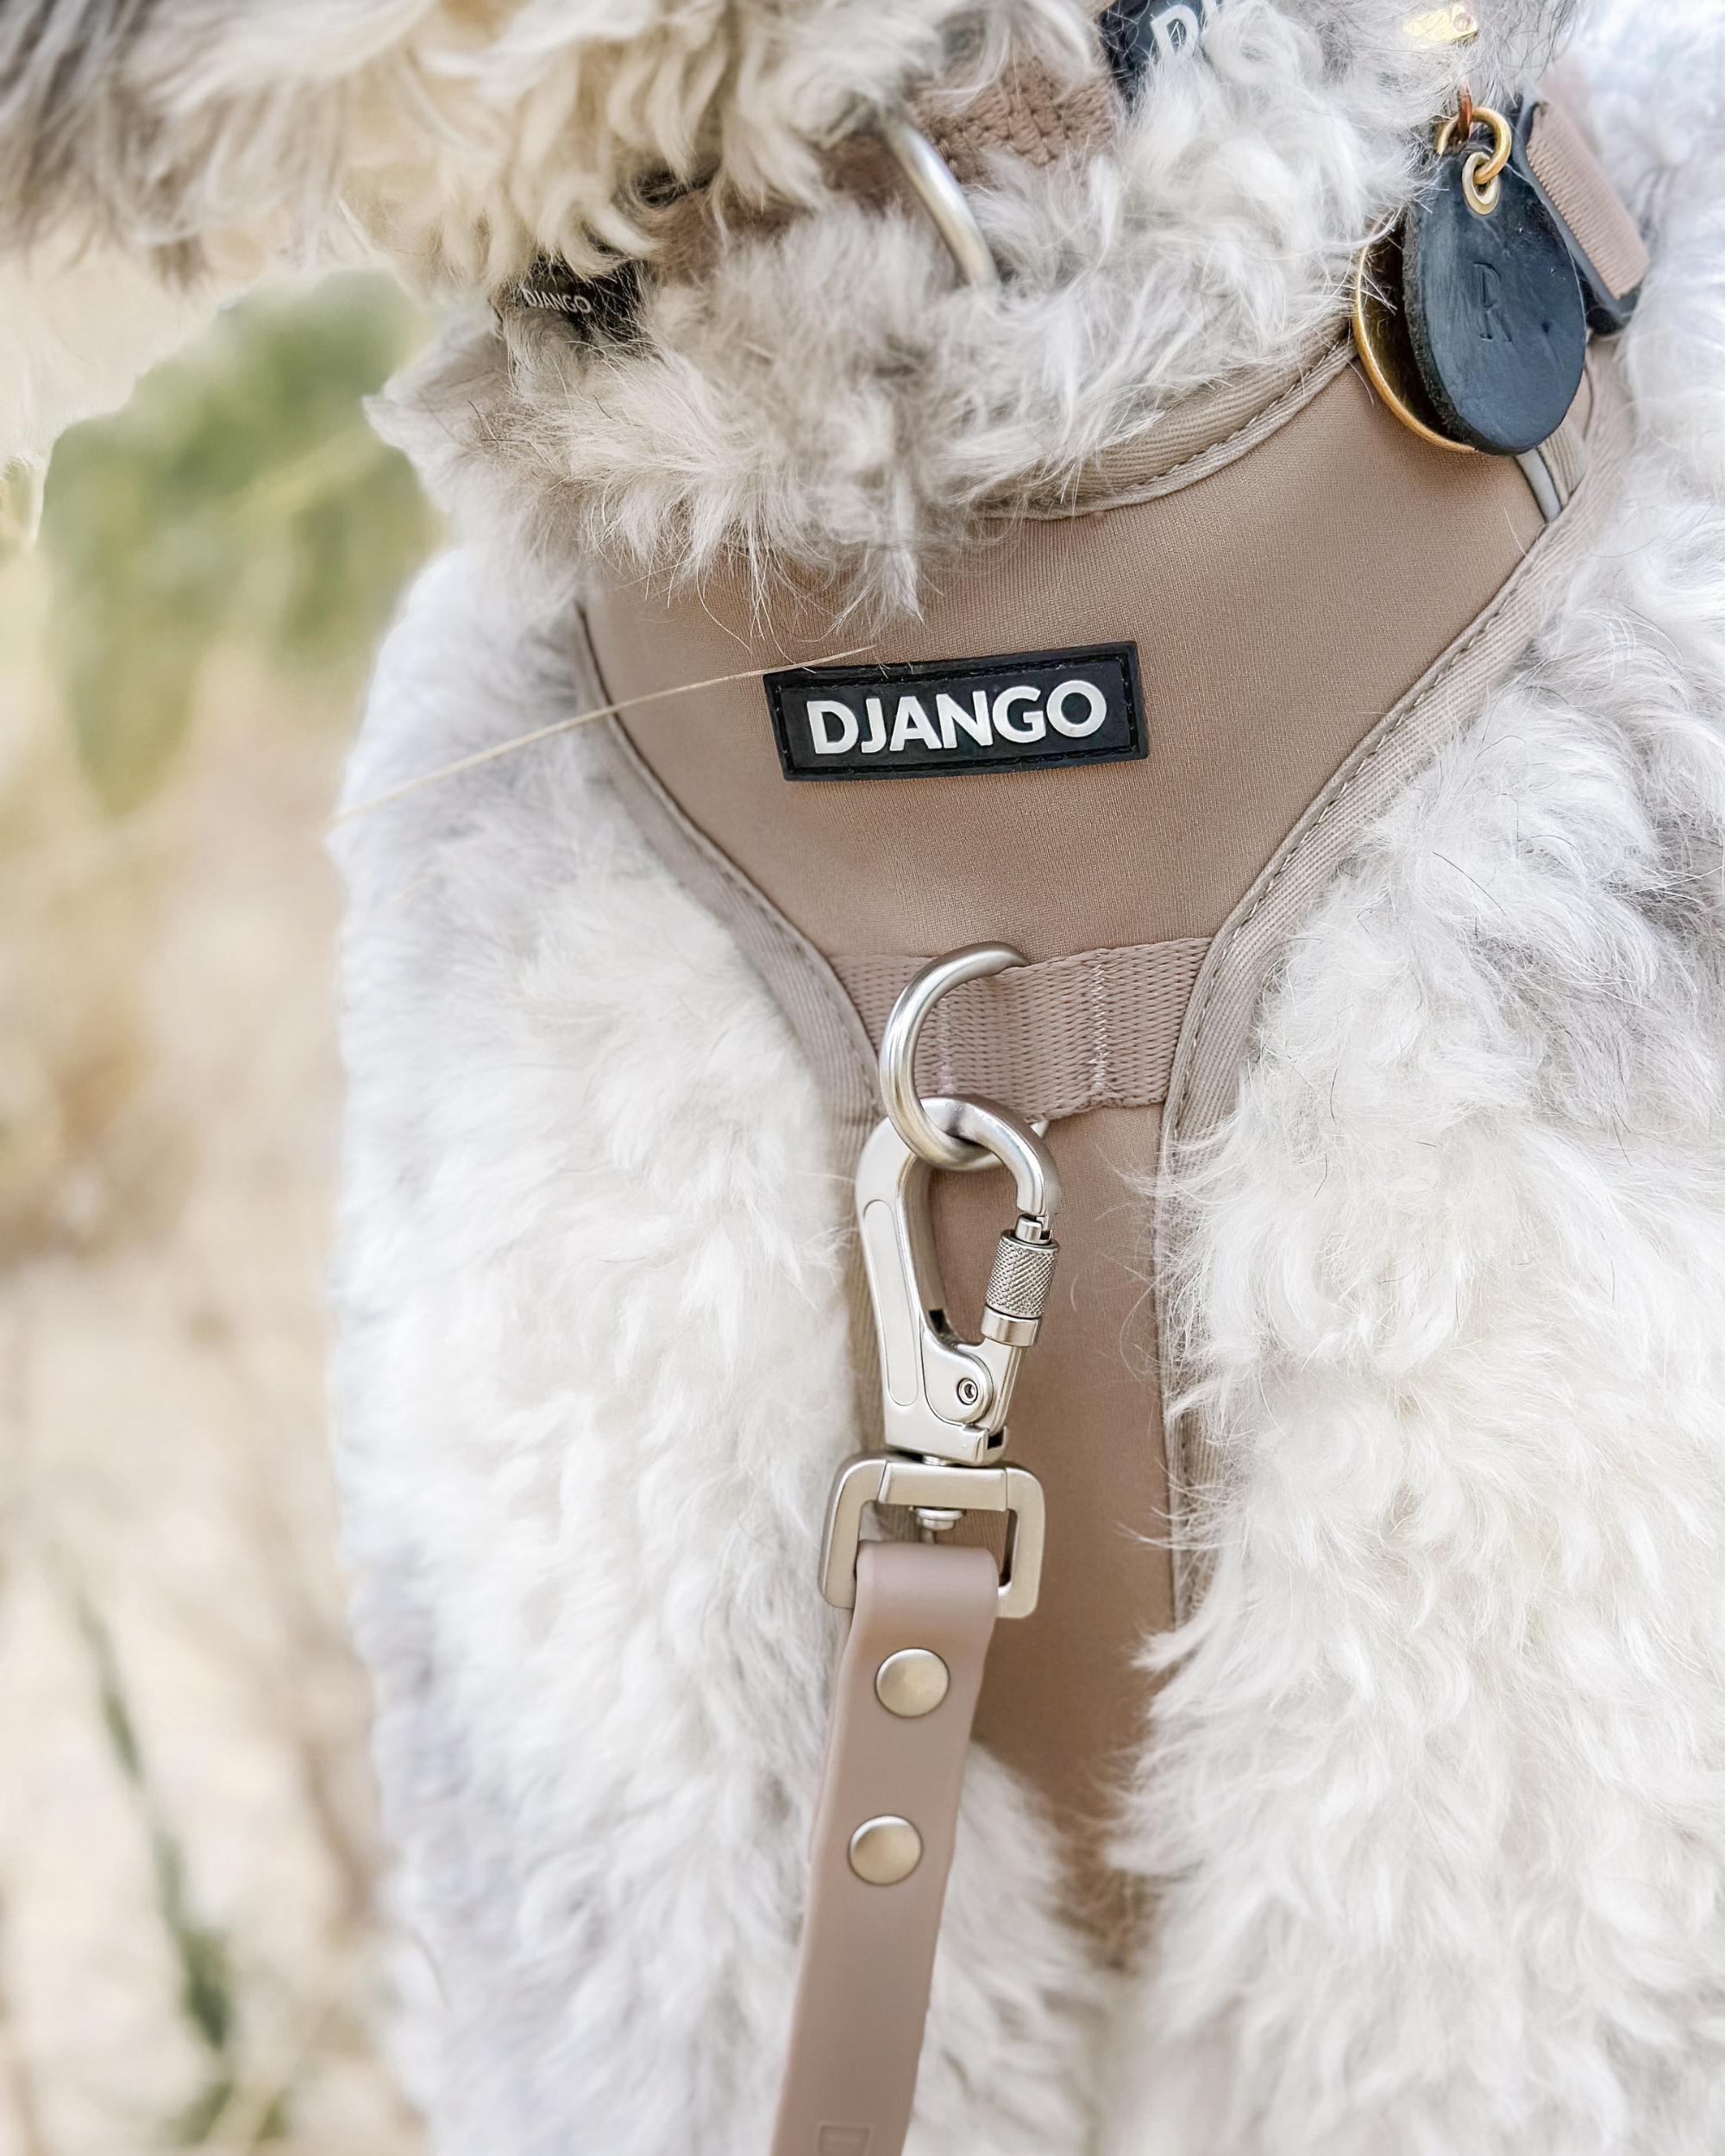 DJANGO Tahoe Dog Leash in Sandy Beige - The waterproof dog leash features heavy duty and stylish plated silver hardware and a premium locking carabiner leash clip for extra security. Shetland sheepdog dog model Kirby wears a size medium DJANGO harness and uses the standard sized DJANGO Tahoe Waterproof Dog Leash. - djangobrand.com